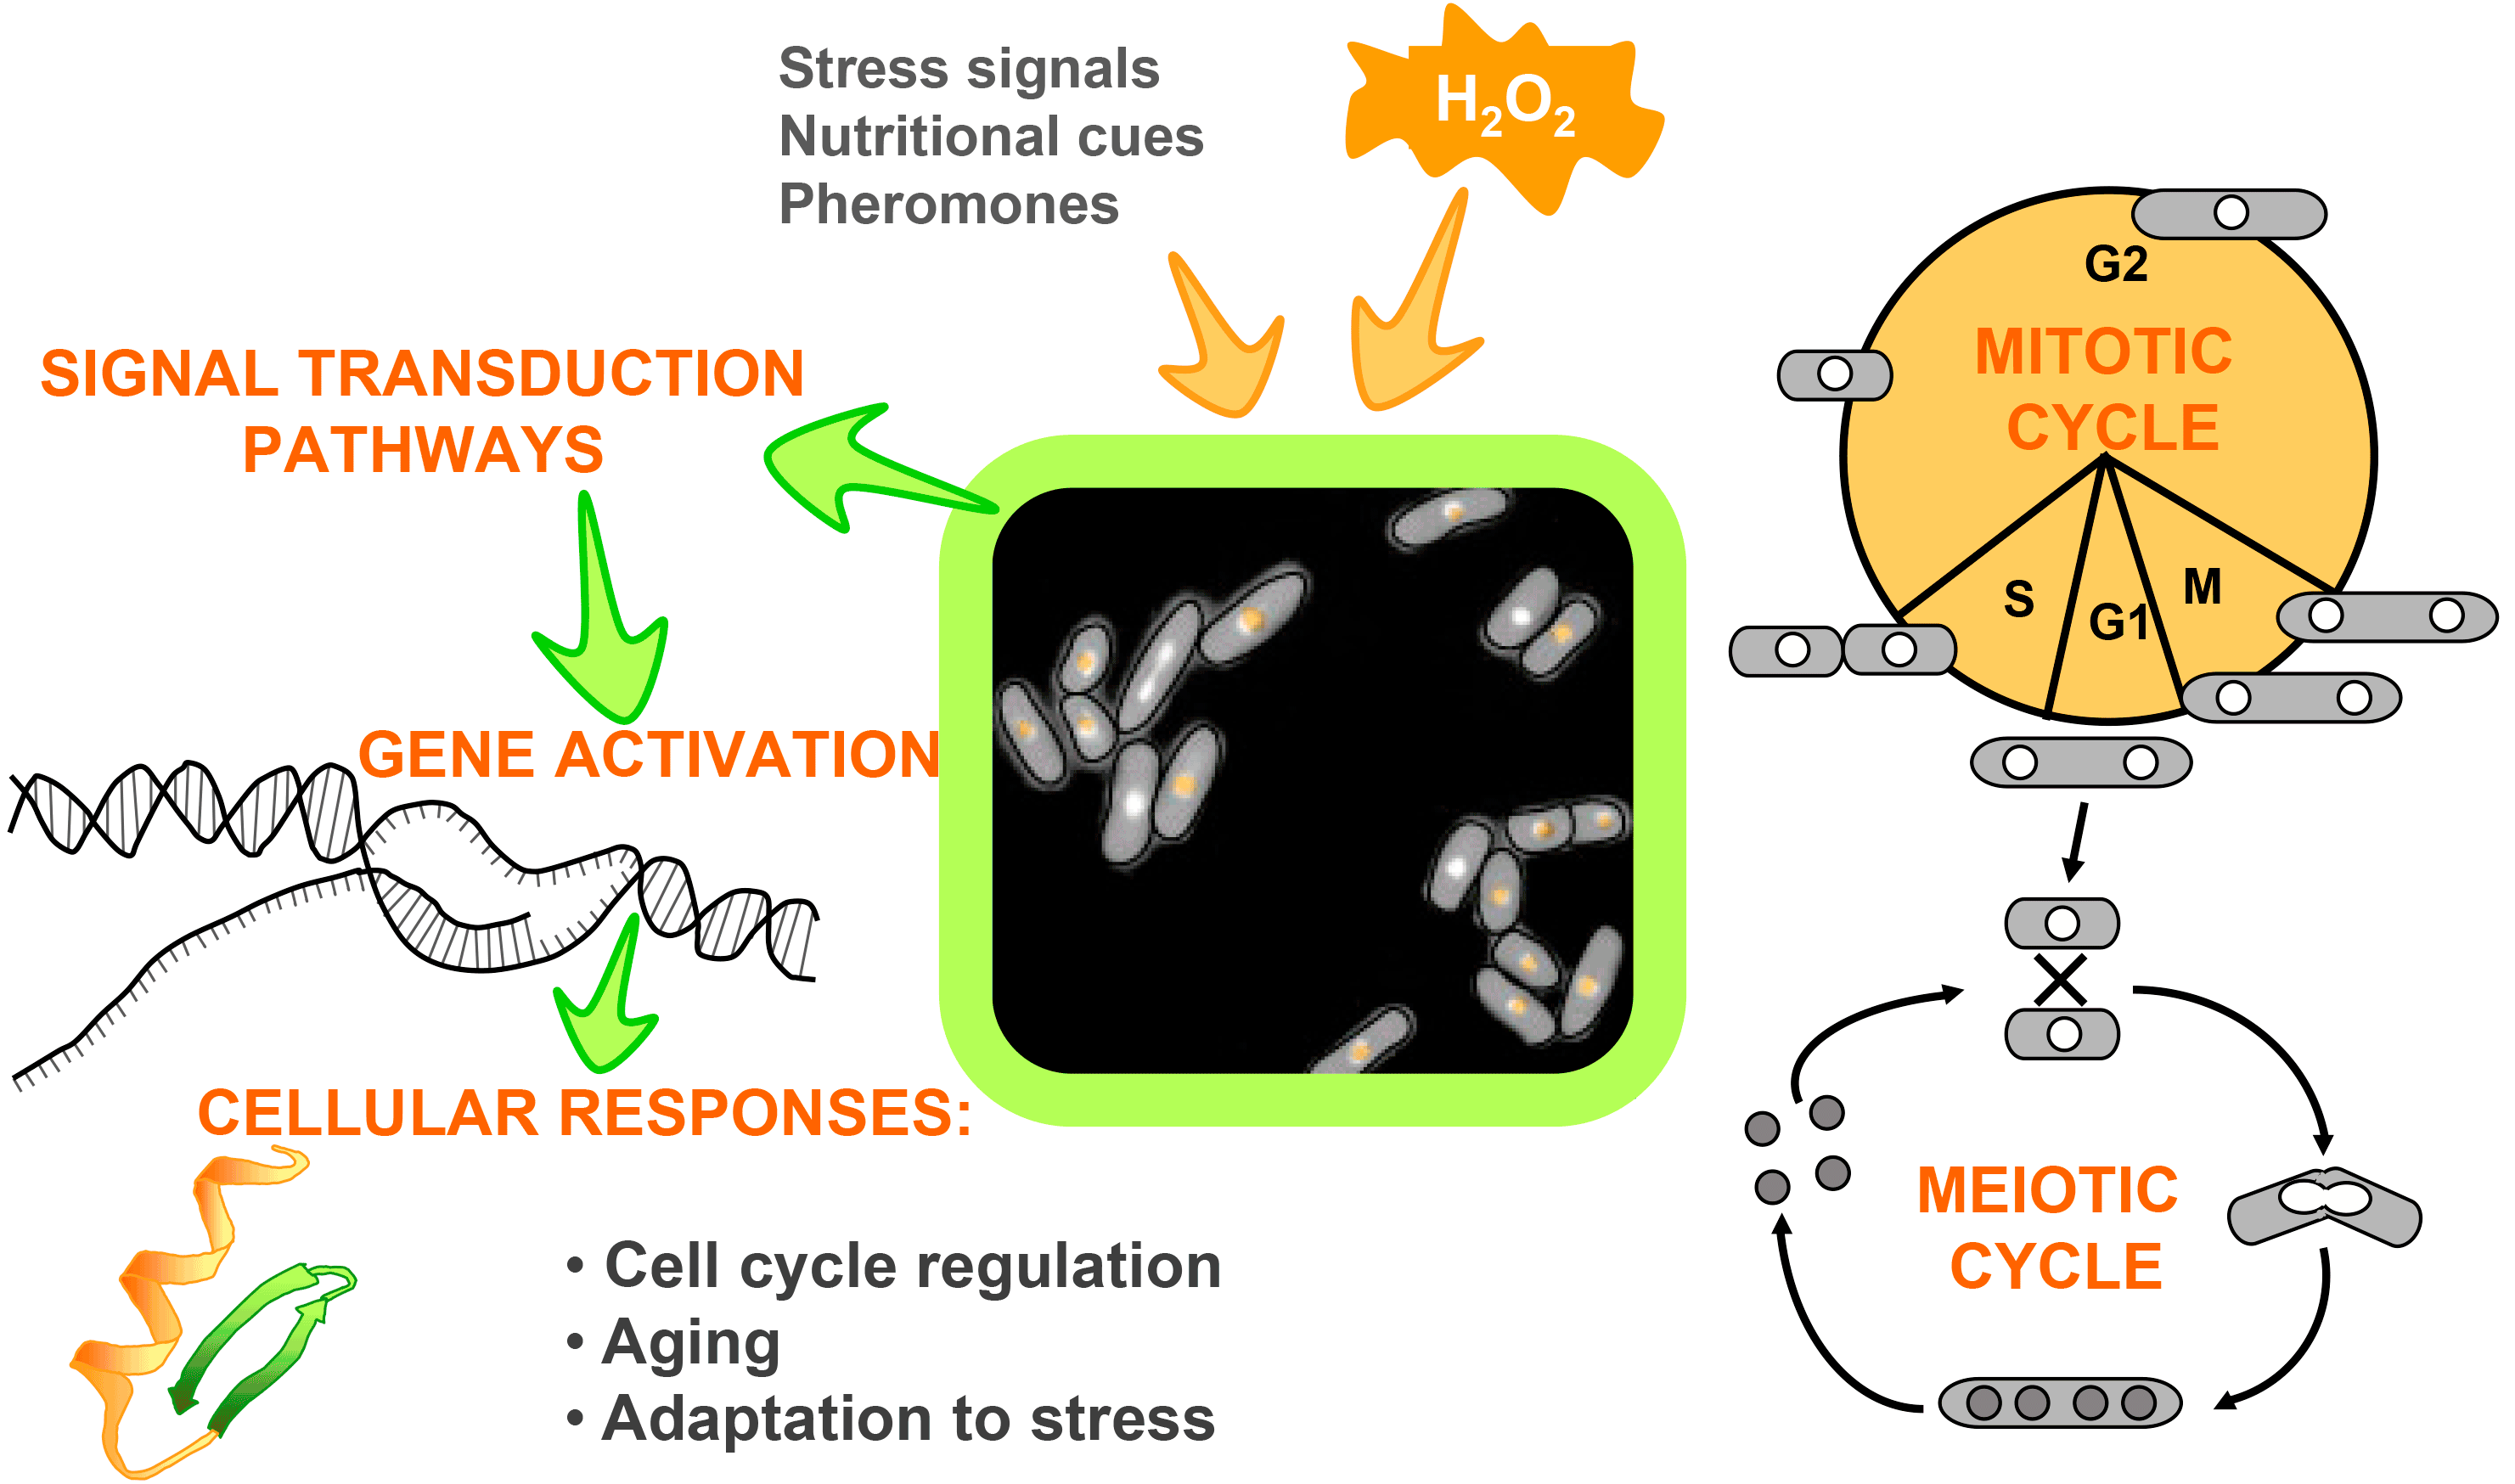 Oxidative Stress and Cell Cycle Research Group